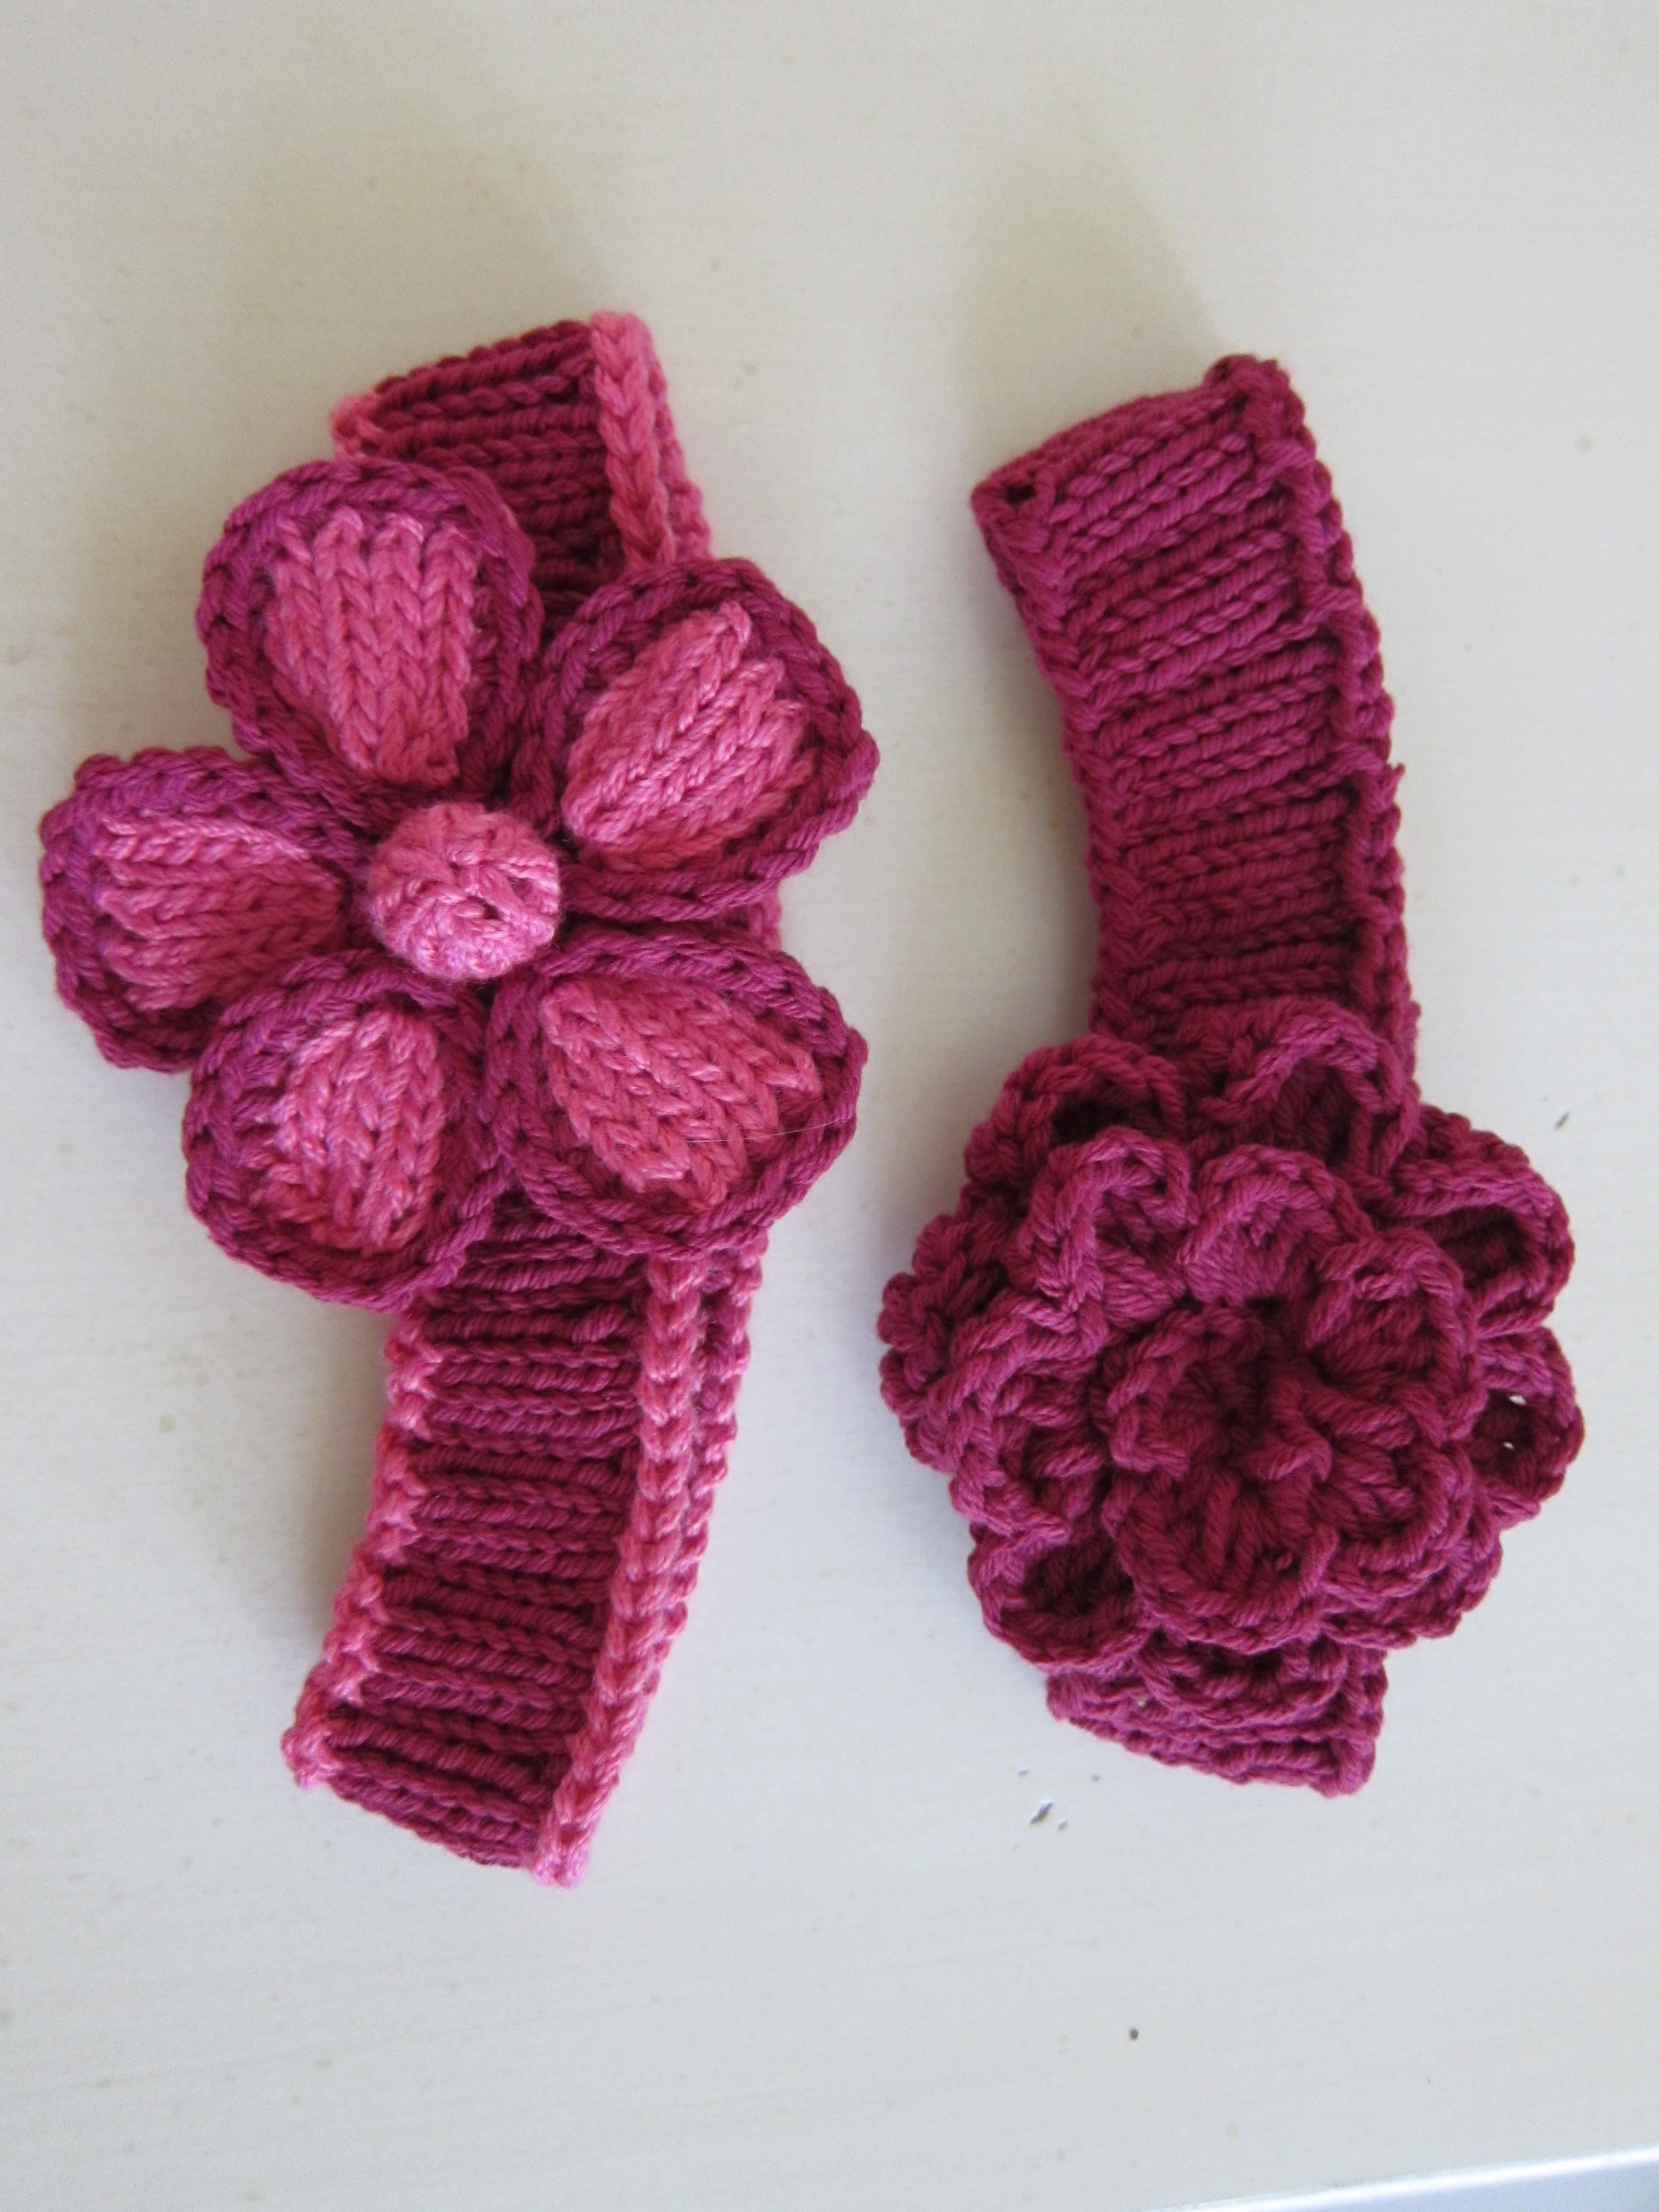 Knitted Headband With Flower Pattern 8 Knitted Headband With Flower Patterns The Funky Stitch